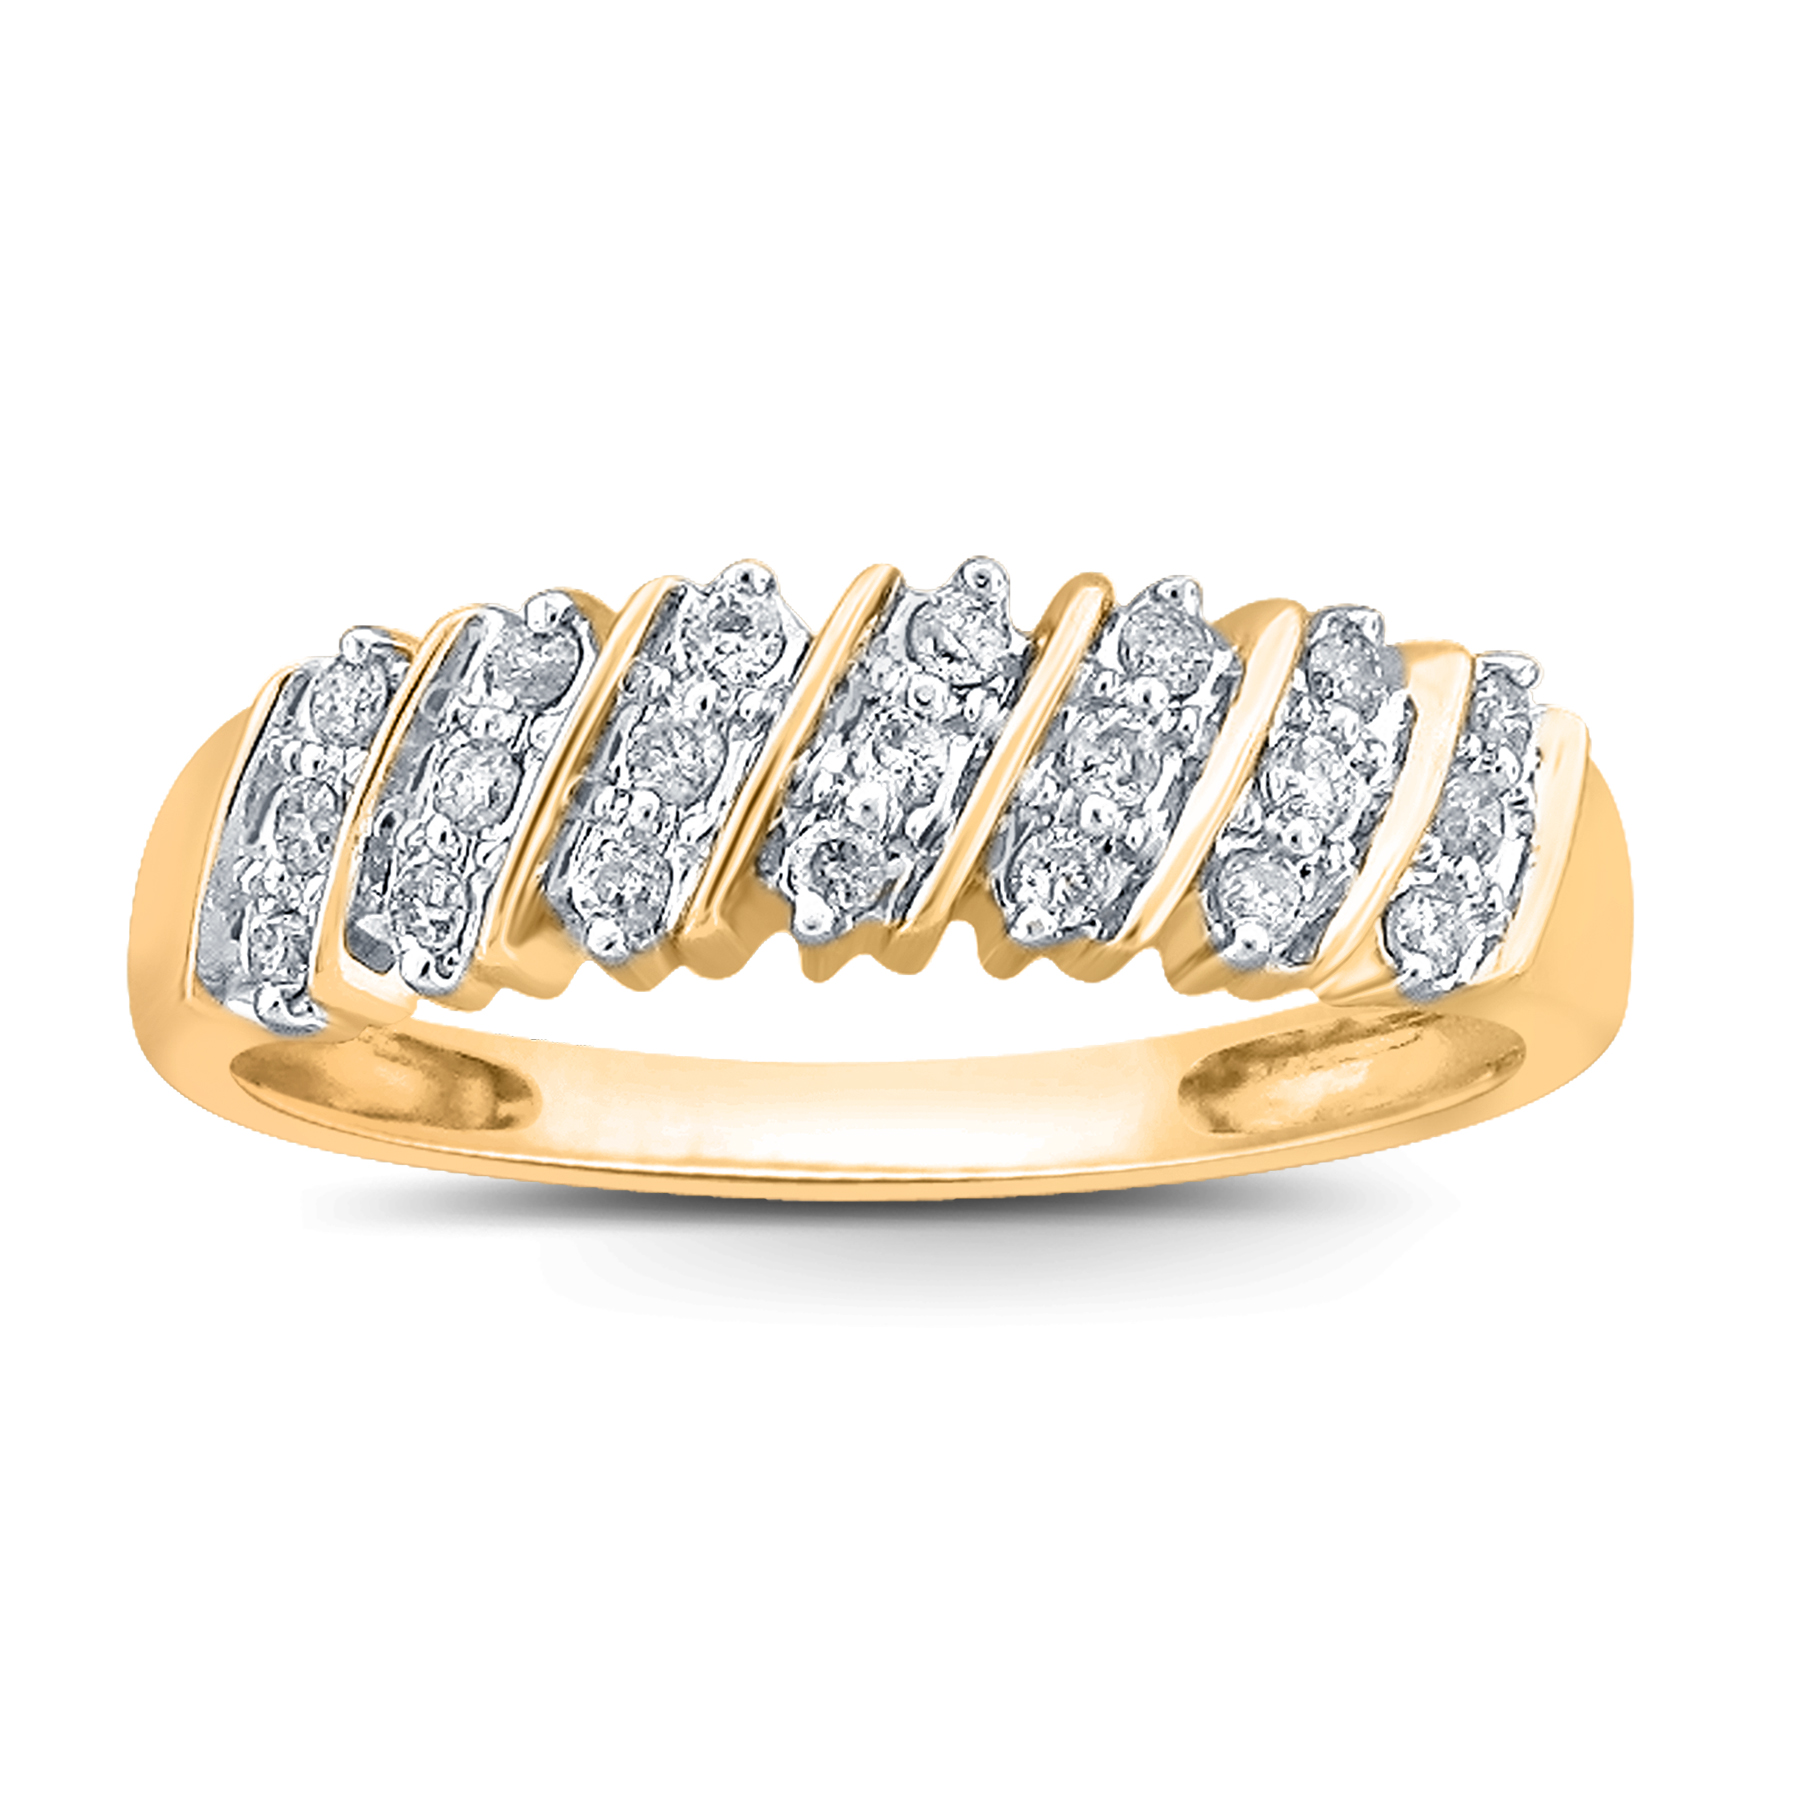 10K Yellow Gold 1/5 CTTW Certified Diamond Triple Row Band Ring